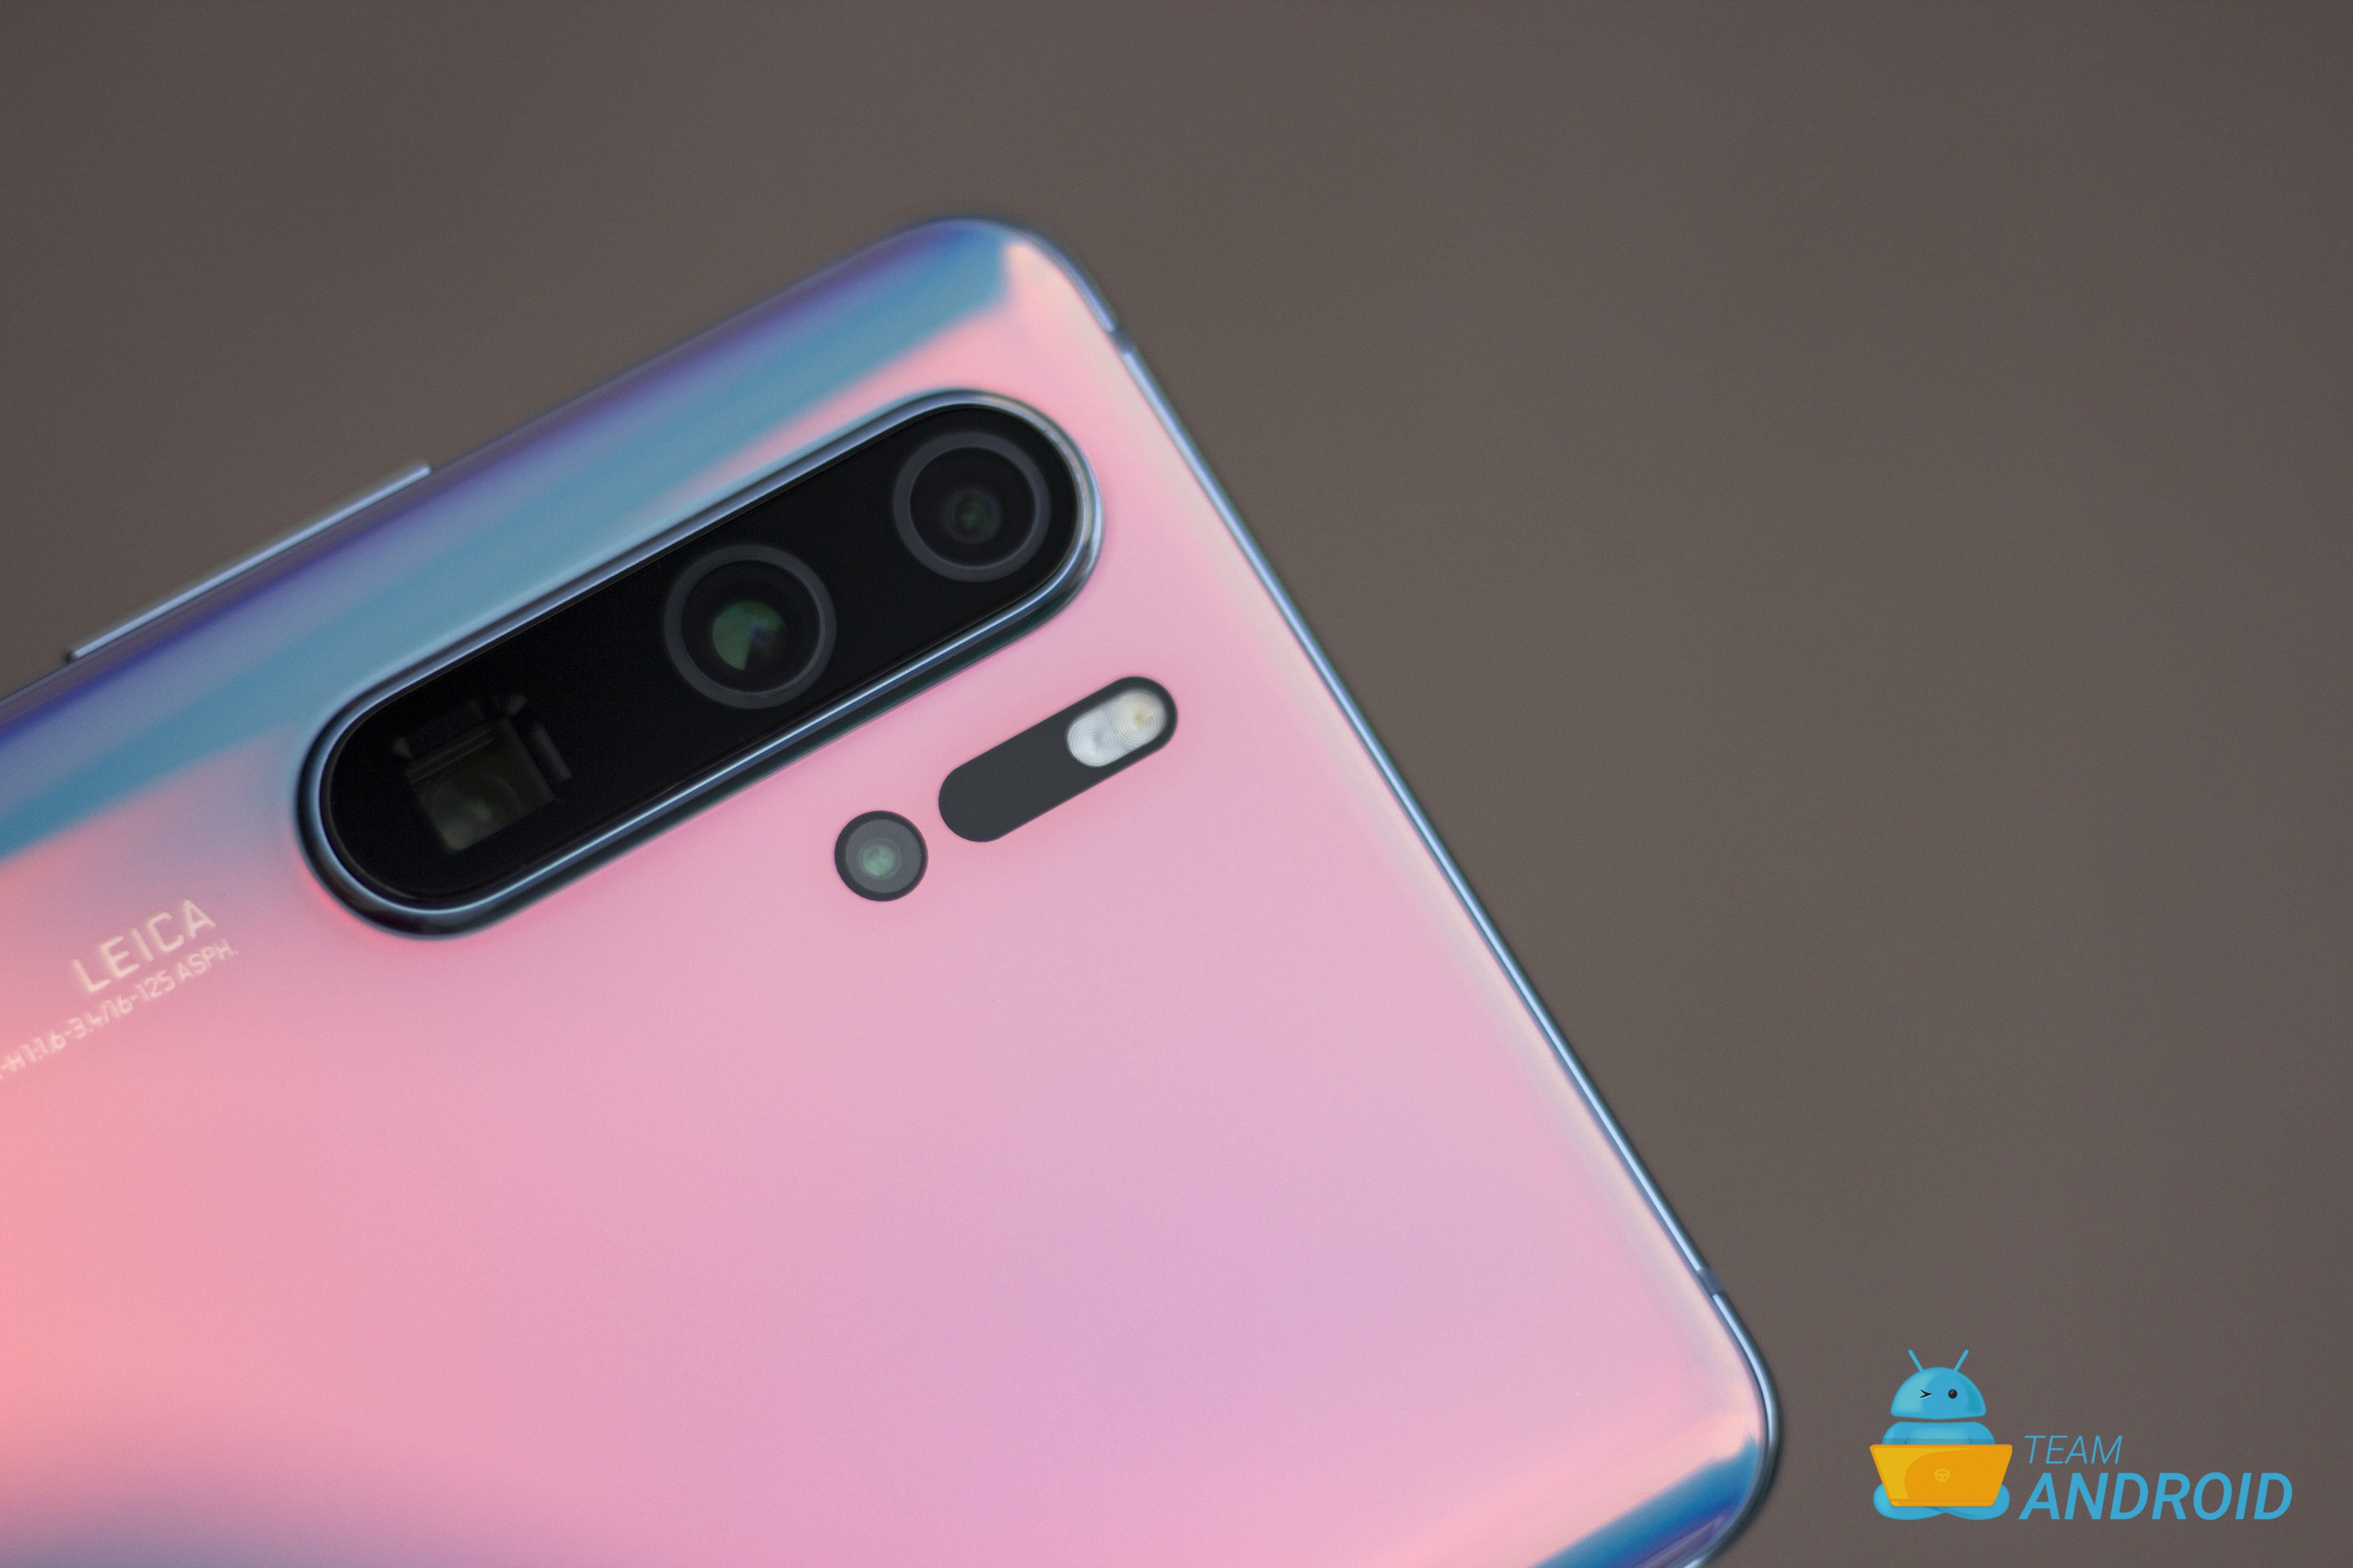 Huawei P30 Pro Review - Excellent Photography, Design and Performance to Match 58